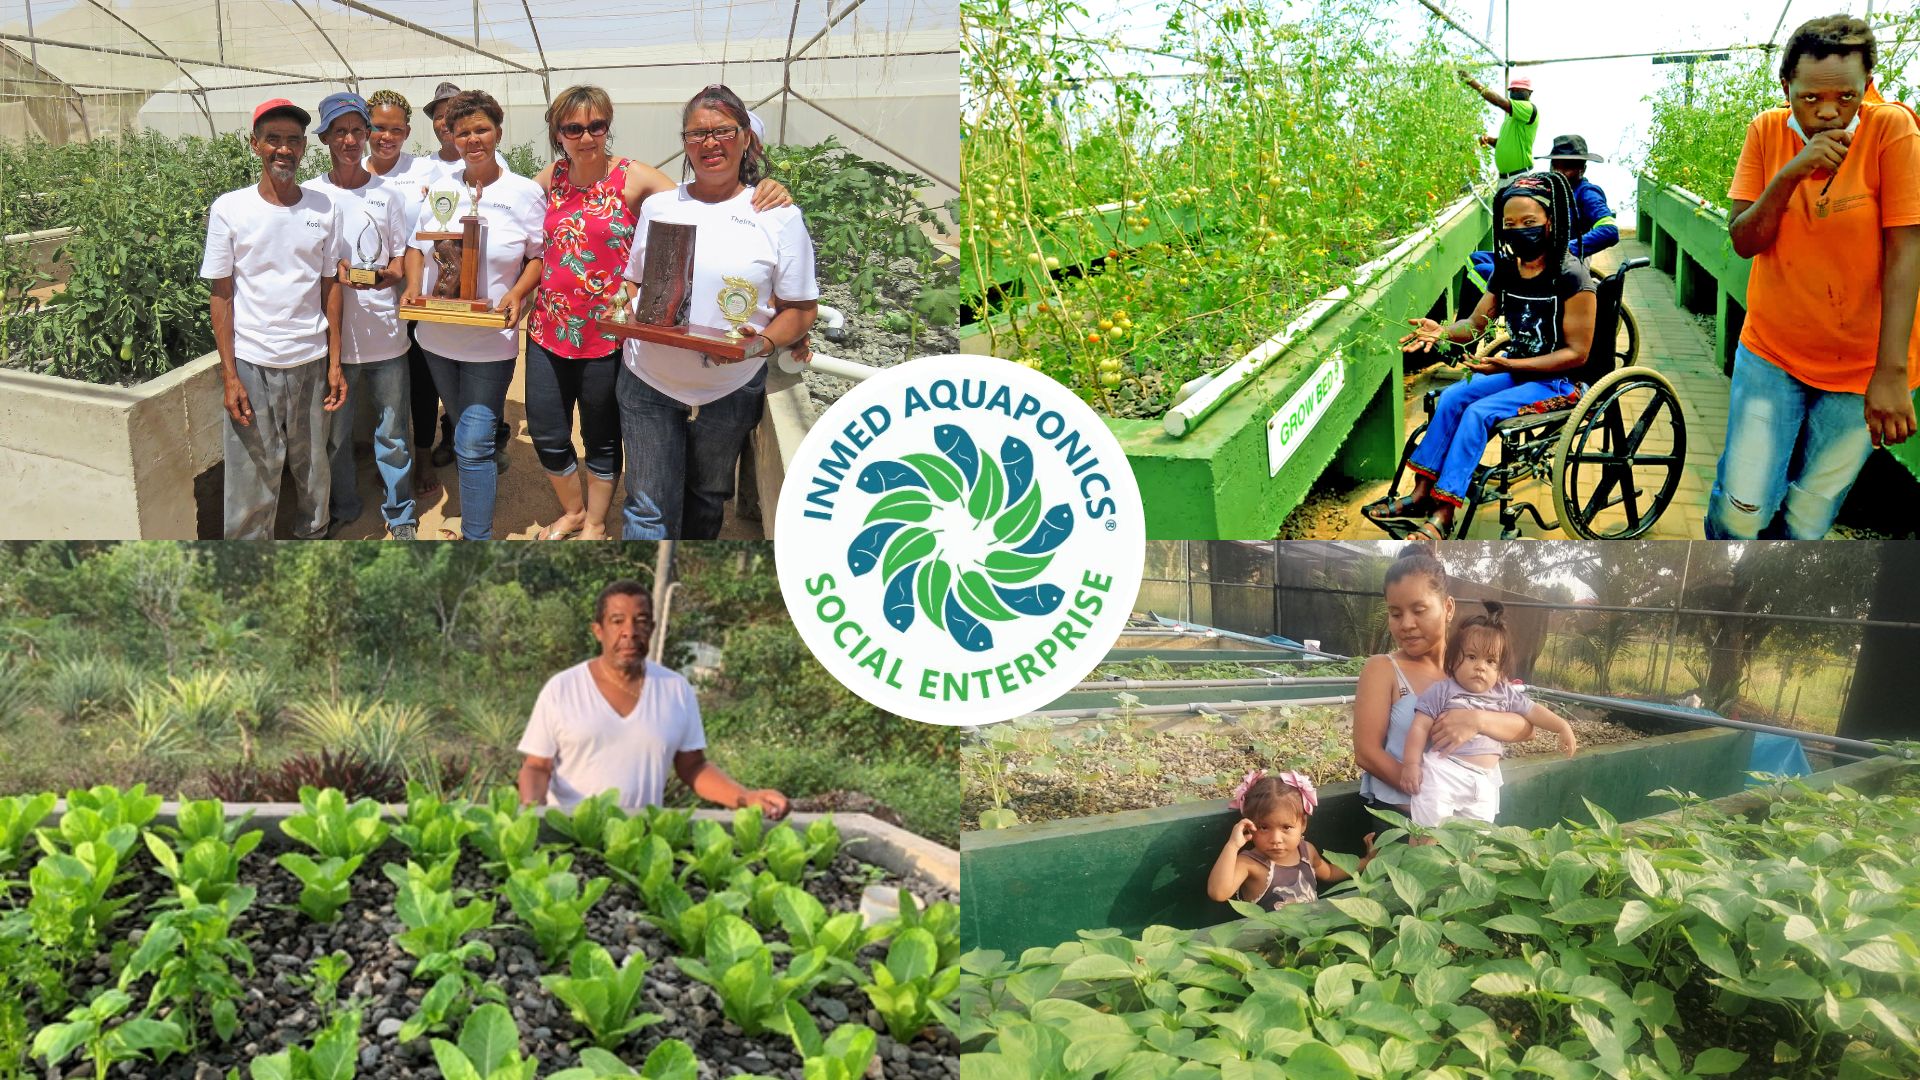 Four different images showing aquaponics farms with logo in center